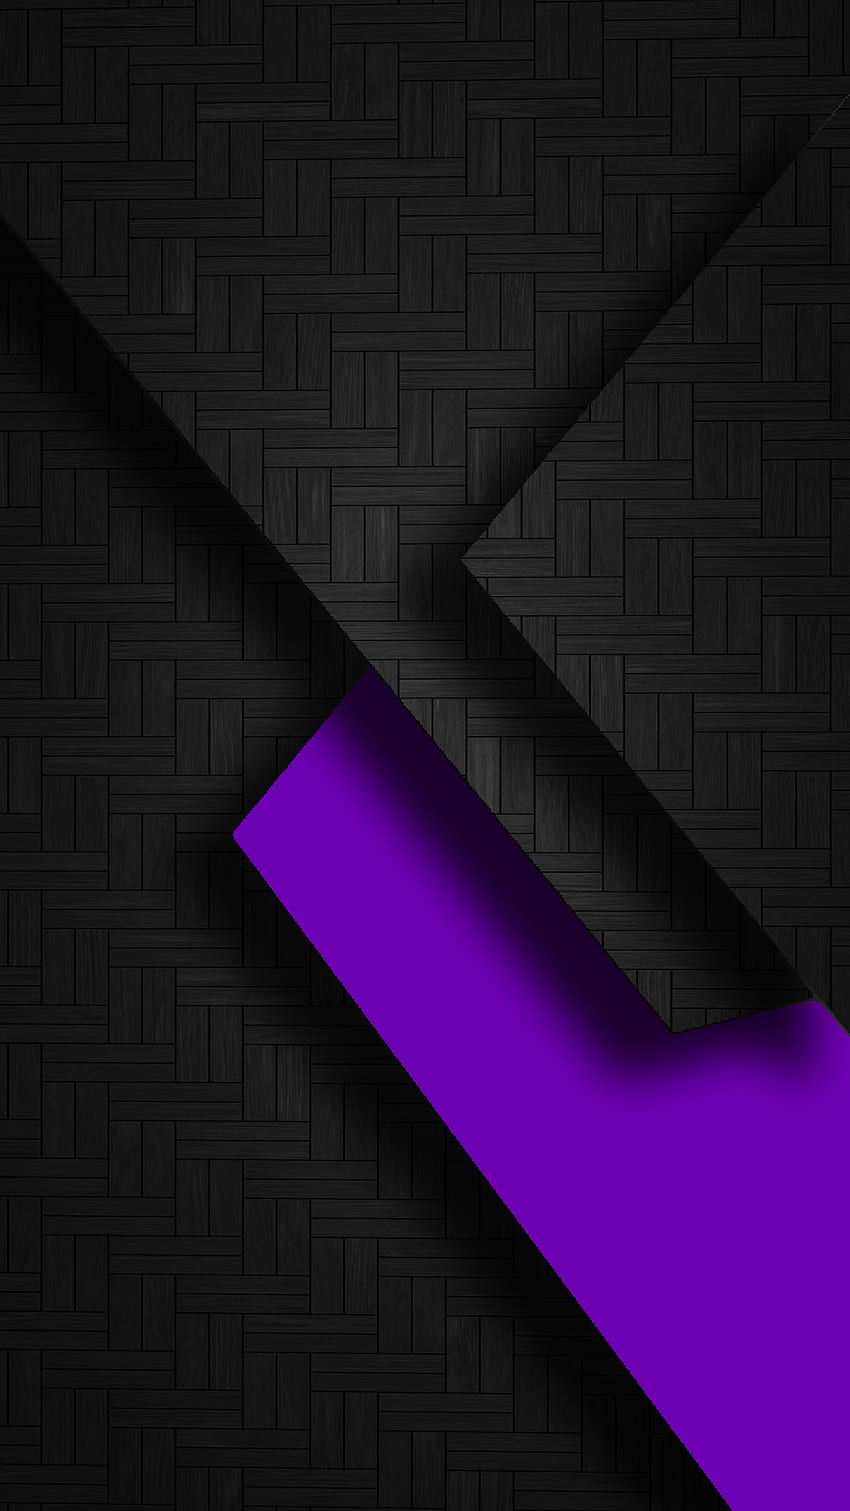 Download wallpapers Purple abstract background Purple geometric  abstraction Purple rectangles background abstract background for desktop  with resolution 2880x1800 High Quality HD pictures wallpapers